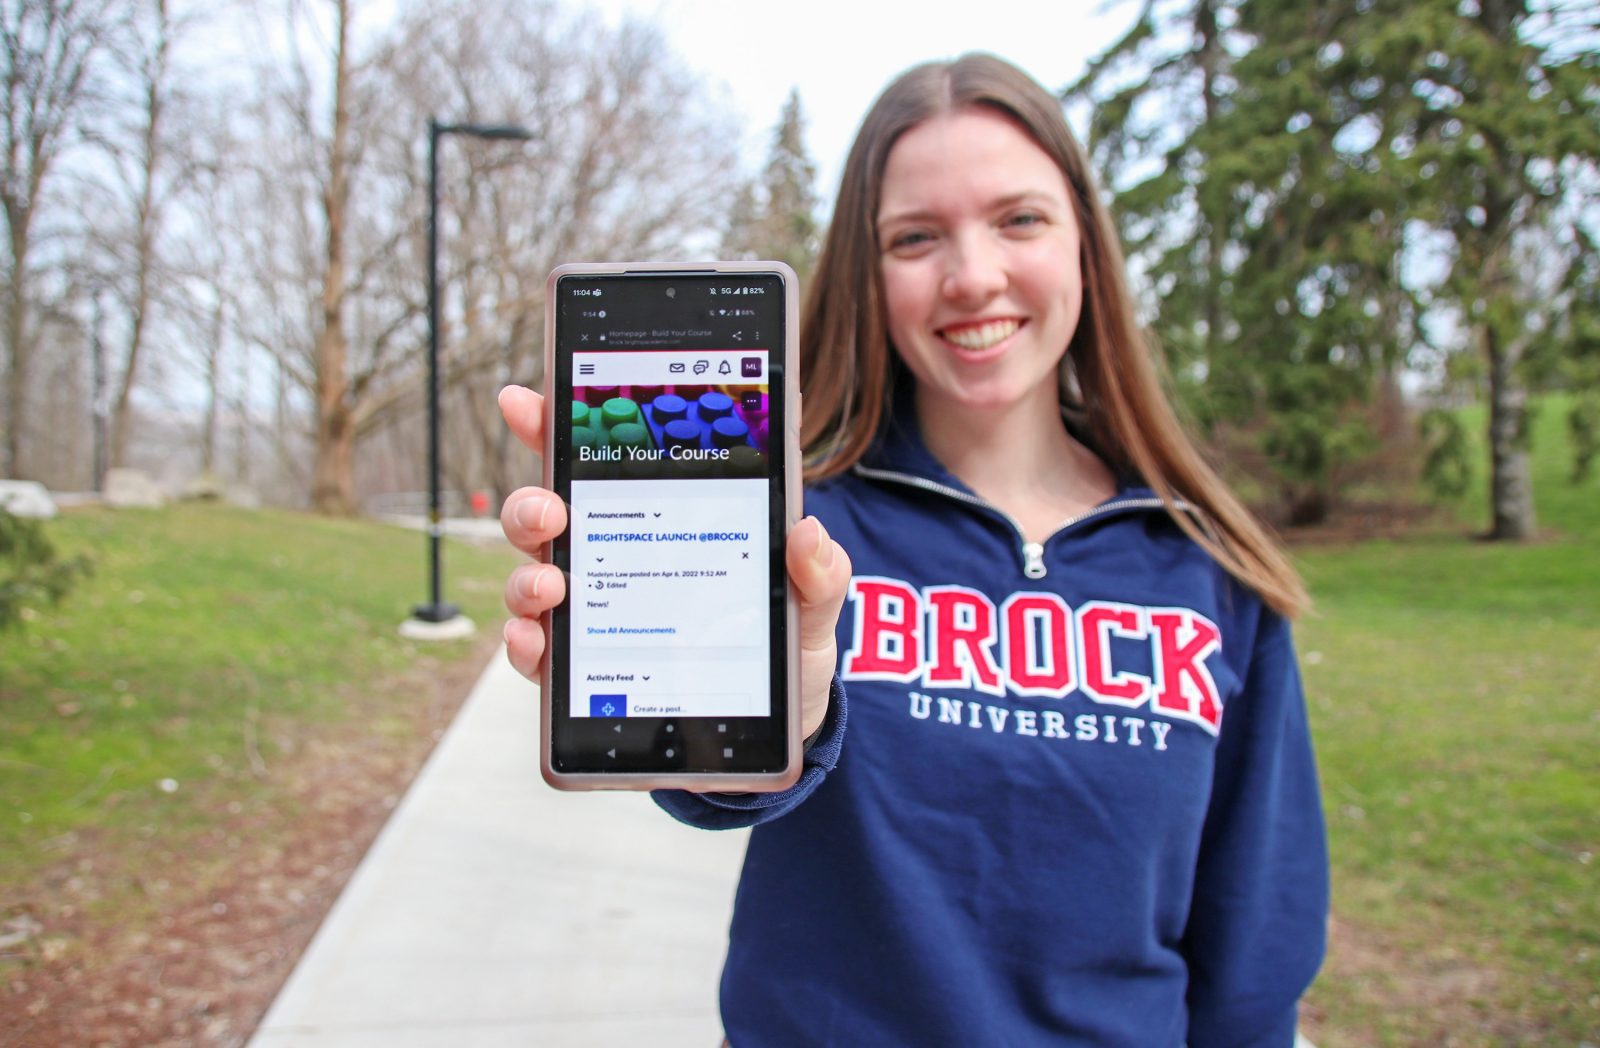 A young woman in a Brock University sweater holds up a smartphone with her arm outstretched and the screen facing the camera.